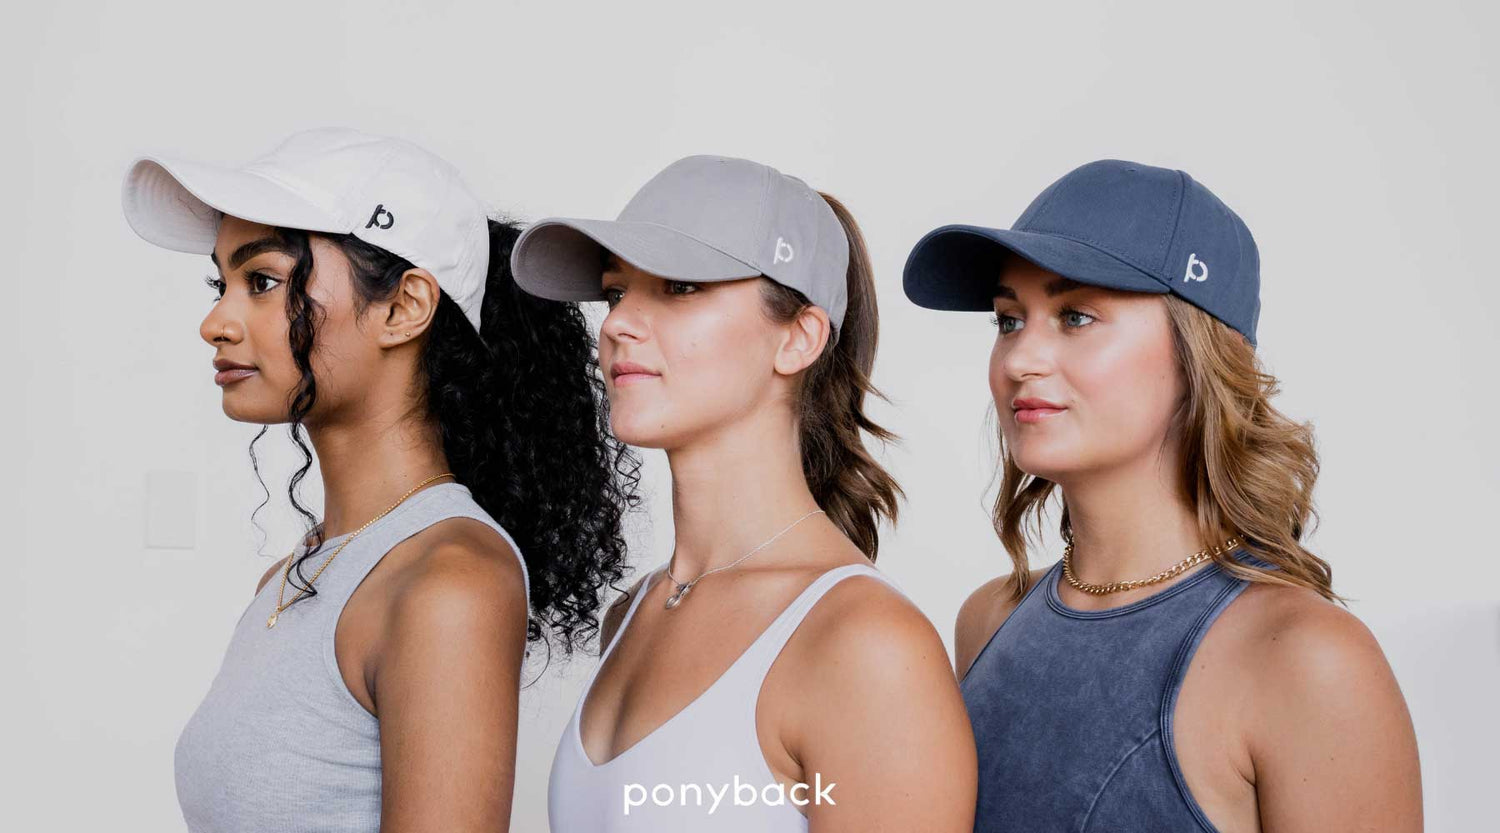 Having Fun With 8 Different Hairstyles In A Ponyback Hat